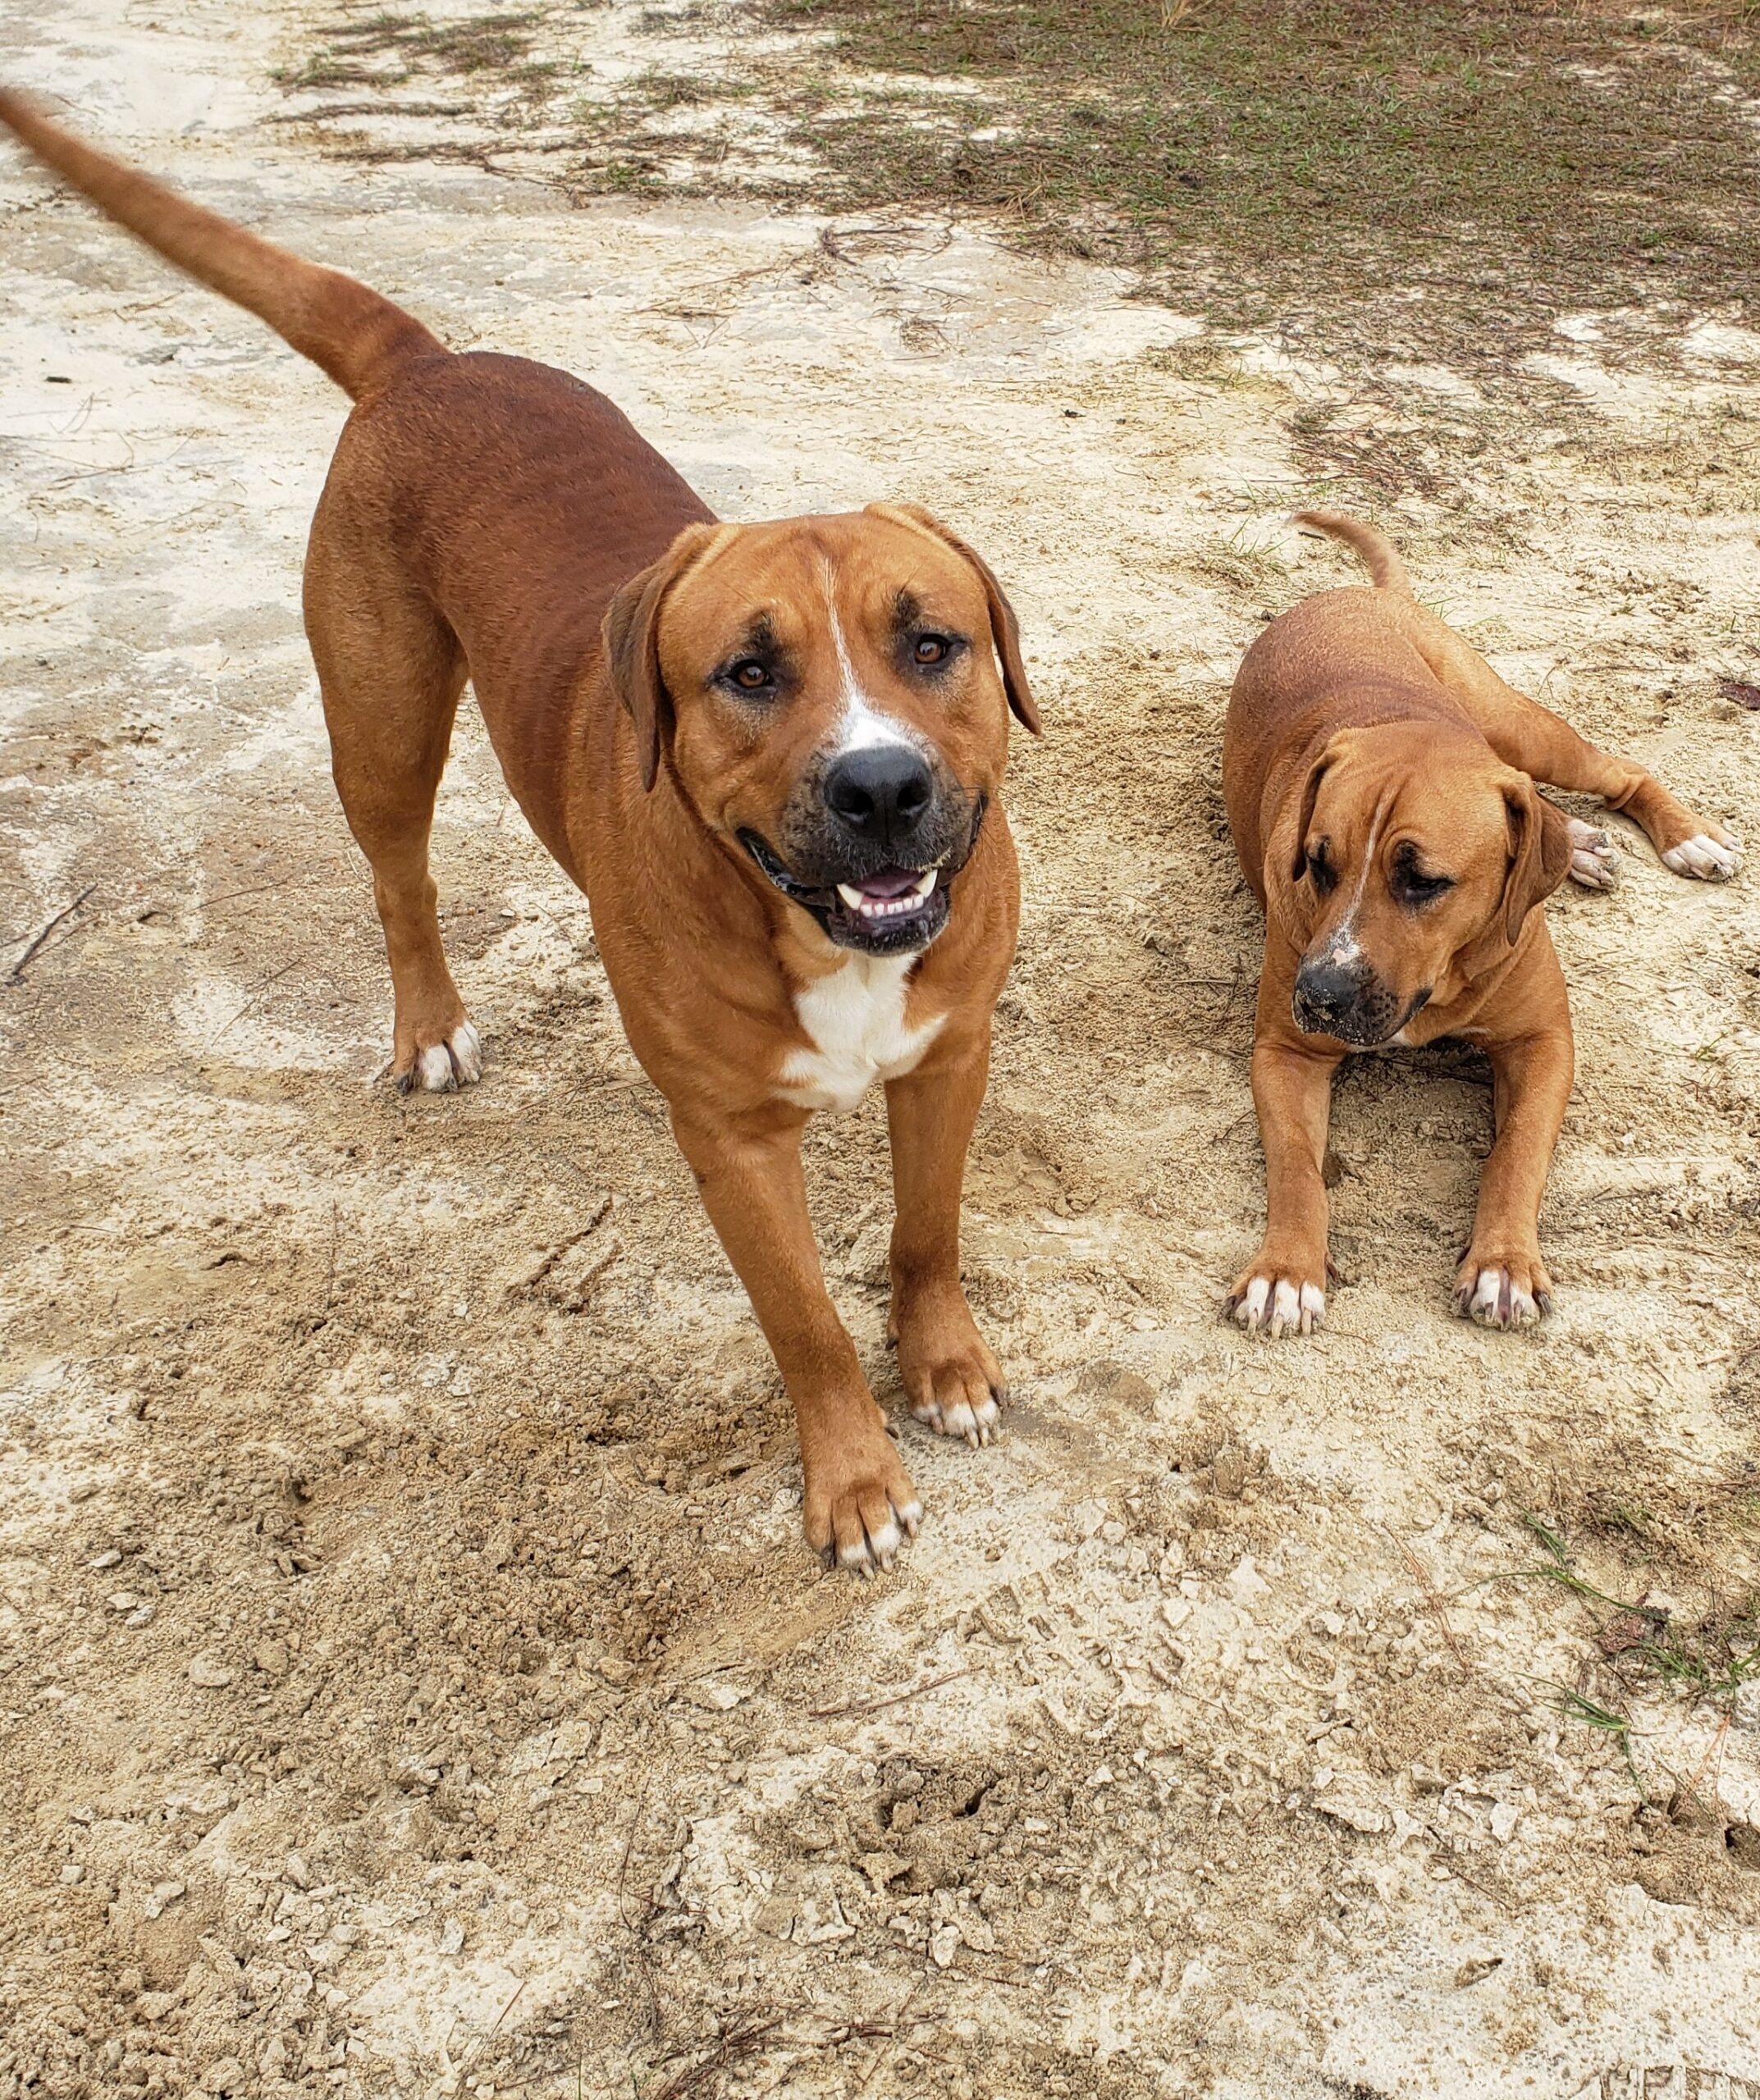 Image is decorative and shows this Tallahassee real estate agents two mastiffs. They are rolling in the dirt and turning their red fur grey. Jerks